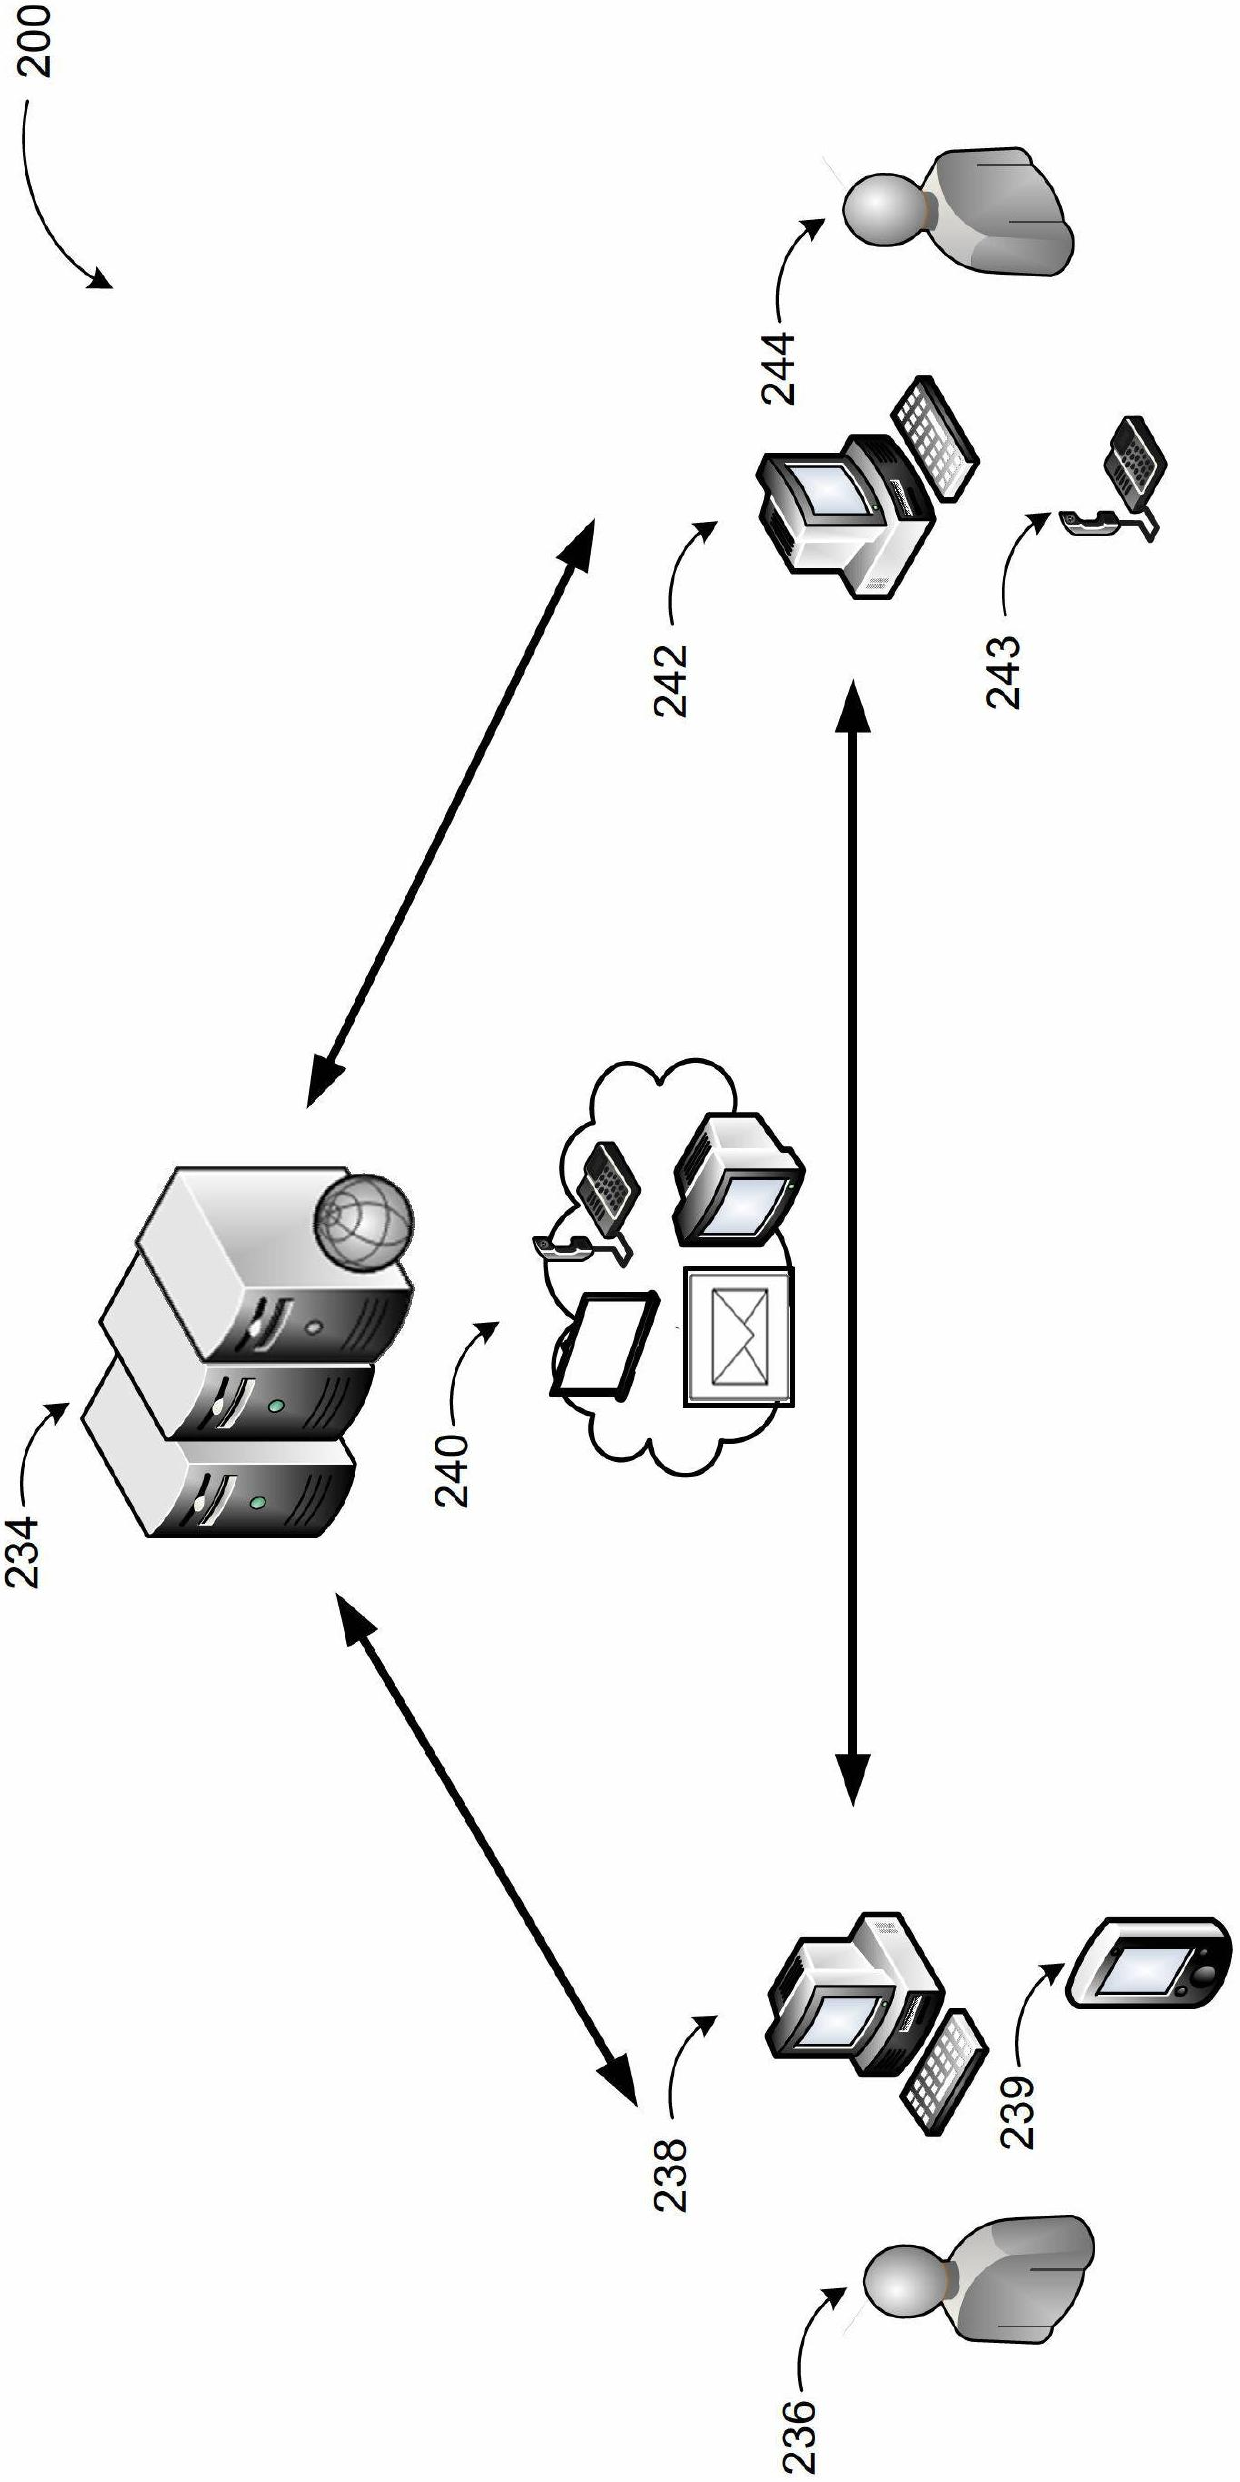 Extensible mechanism for conveying feature capabilities in conversation systems